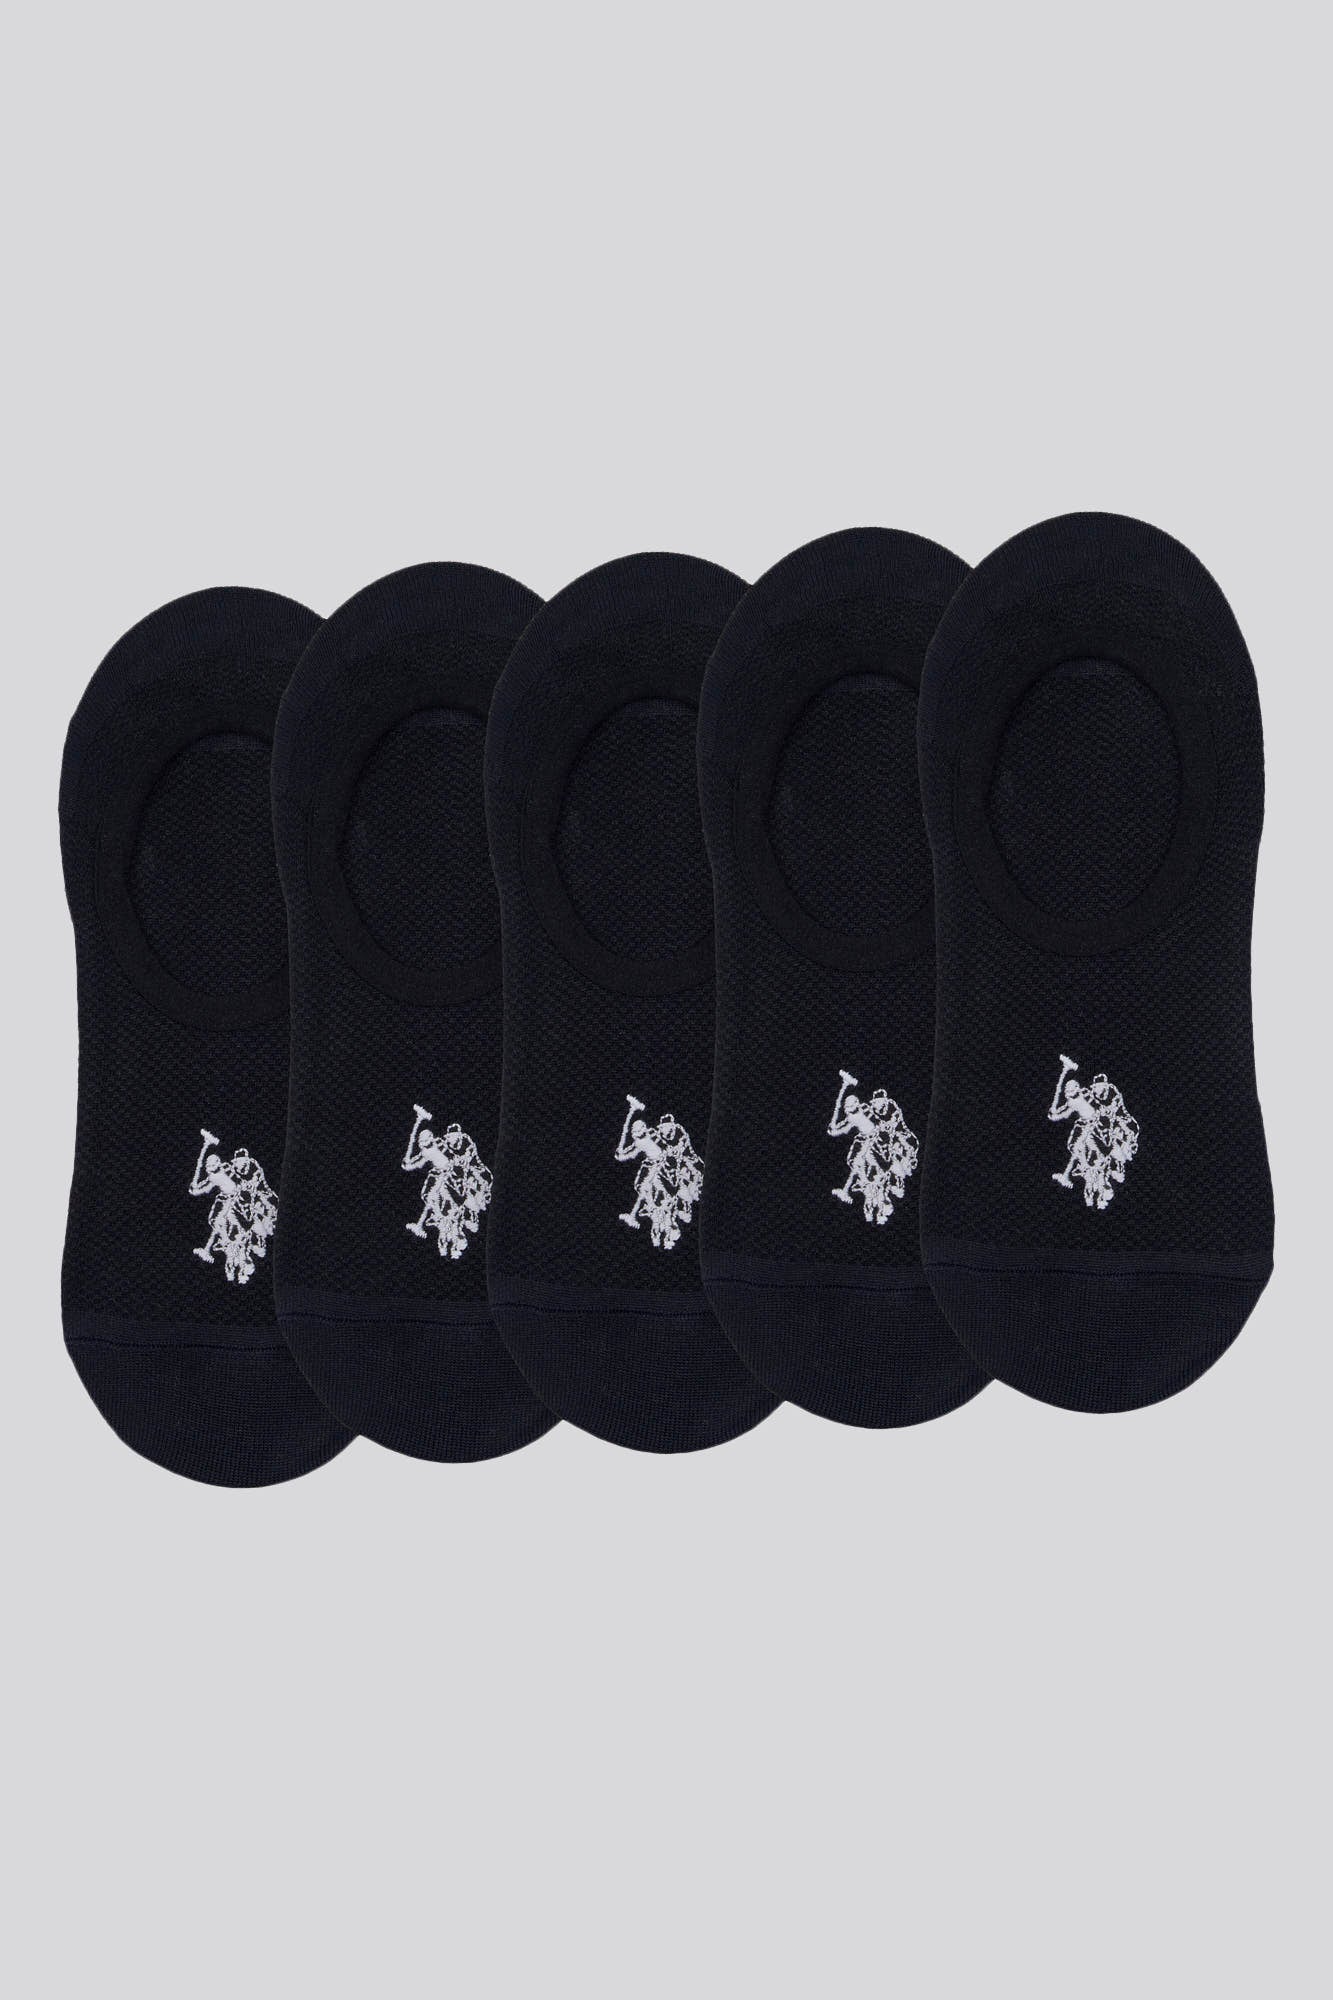 U.S. Polo Assn. 5 Pack Invisible Trainer Socks in Black